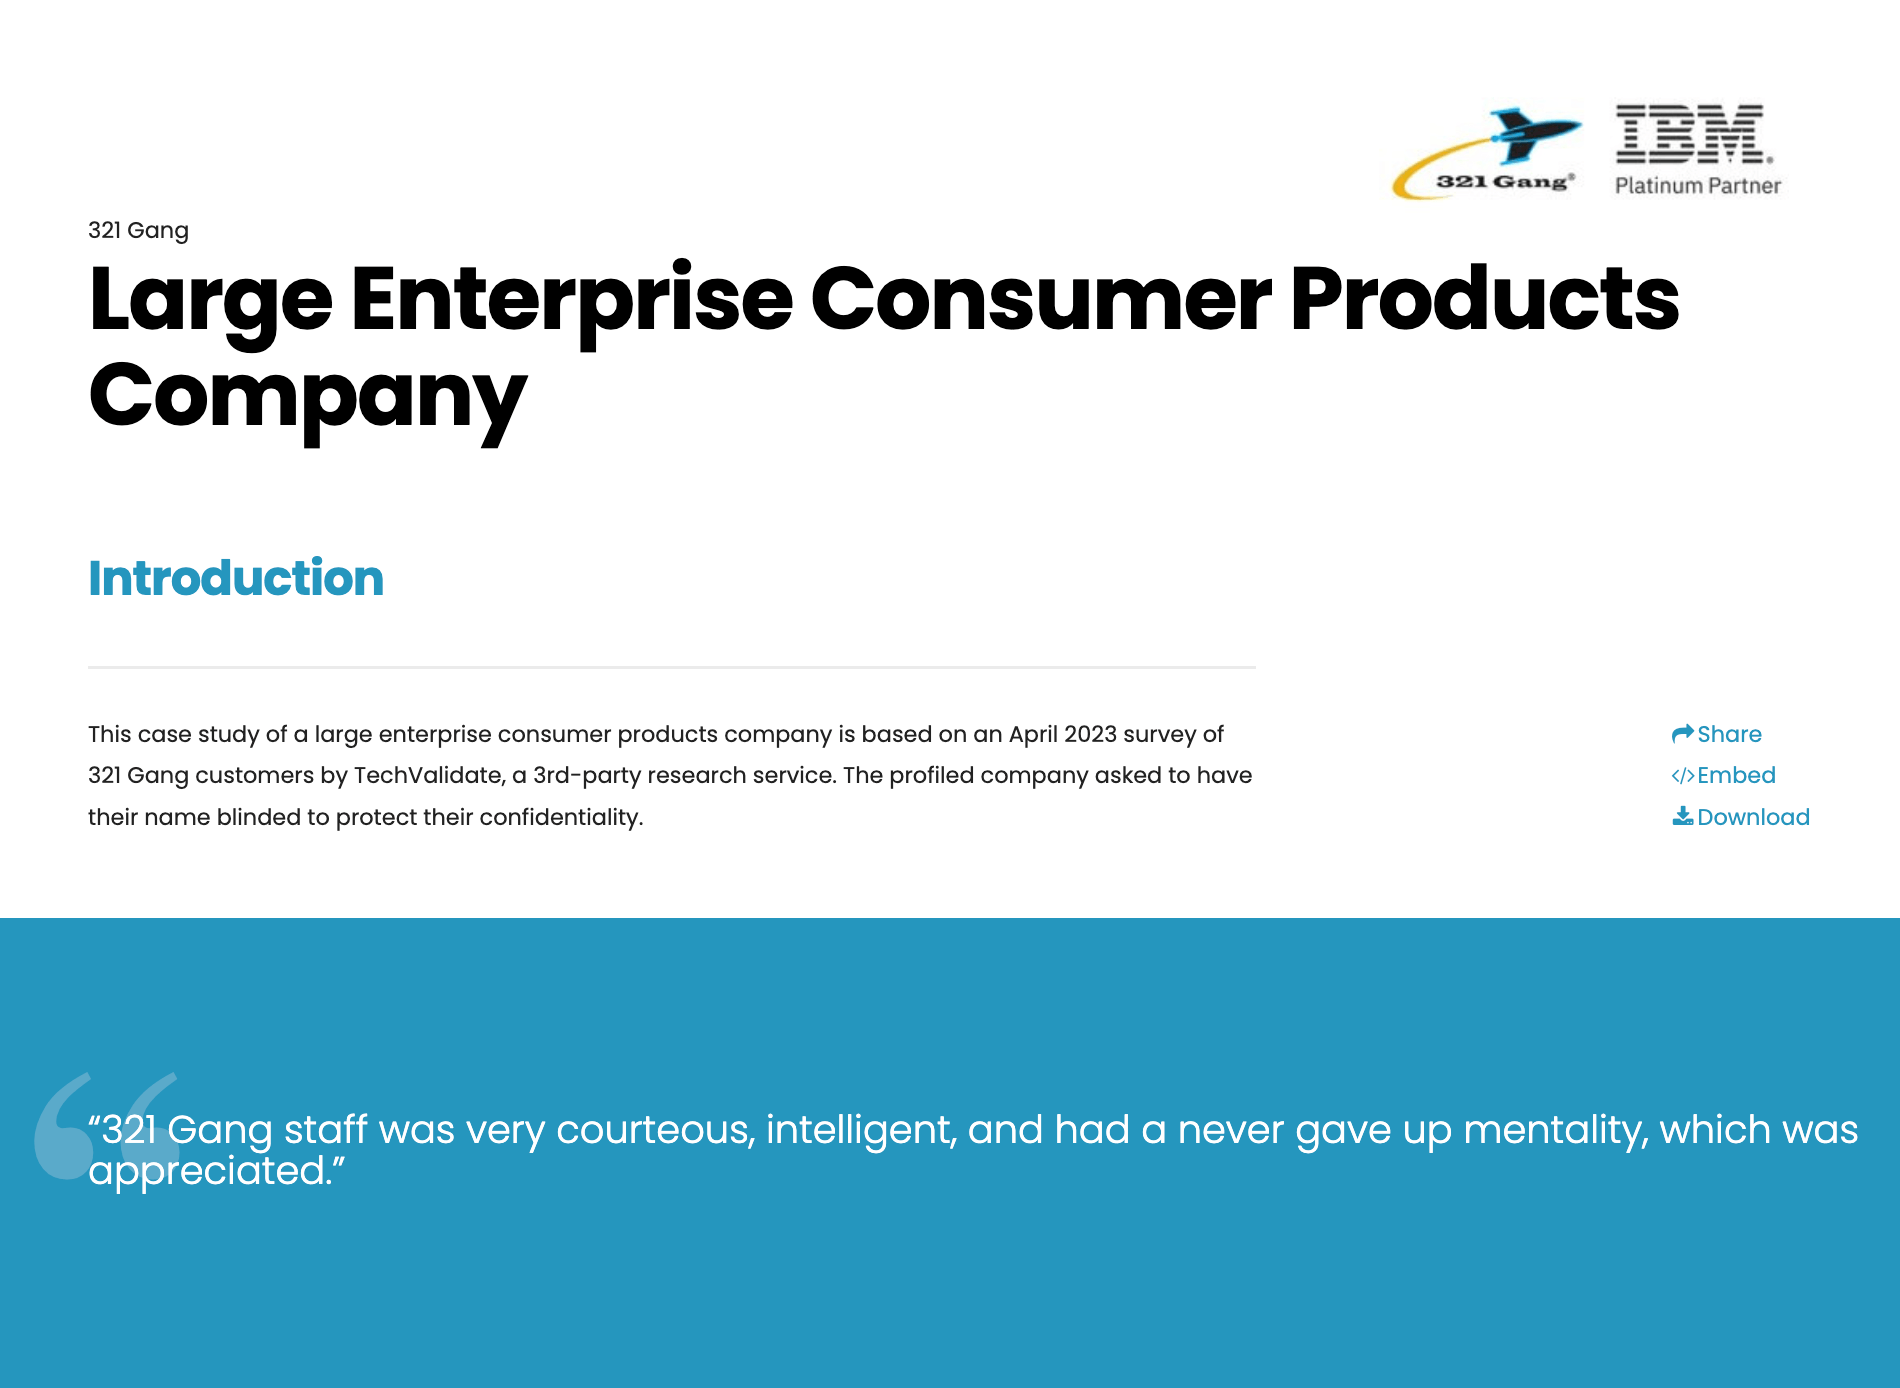 Large Enterprise Consumer Products Company preview